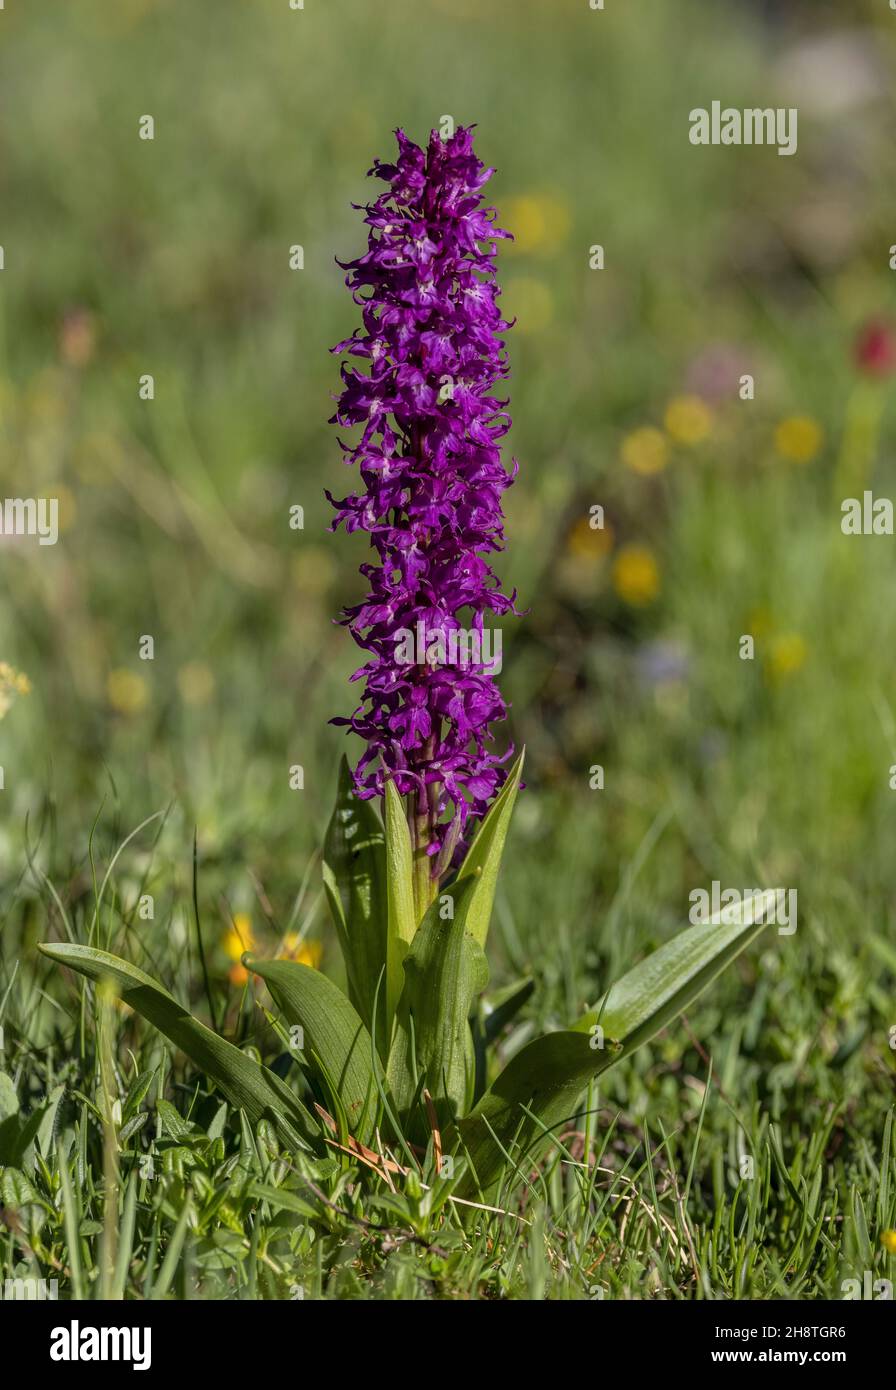 Bohemian Early Purple Orchid, Orchis mascula subsp. speciosa, in flower in alpine grassland, french Alps. Stock Photo